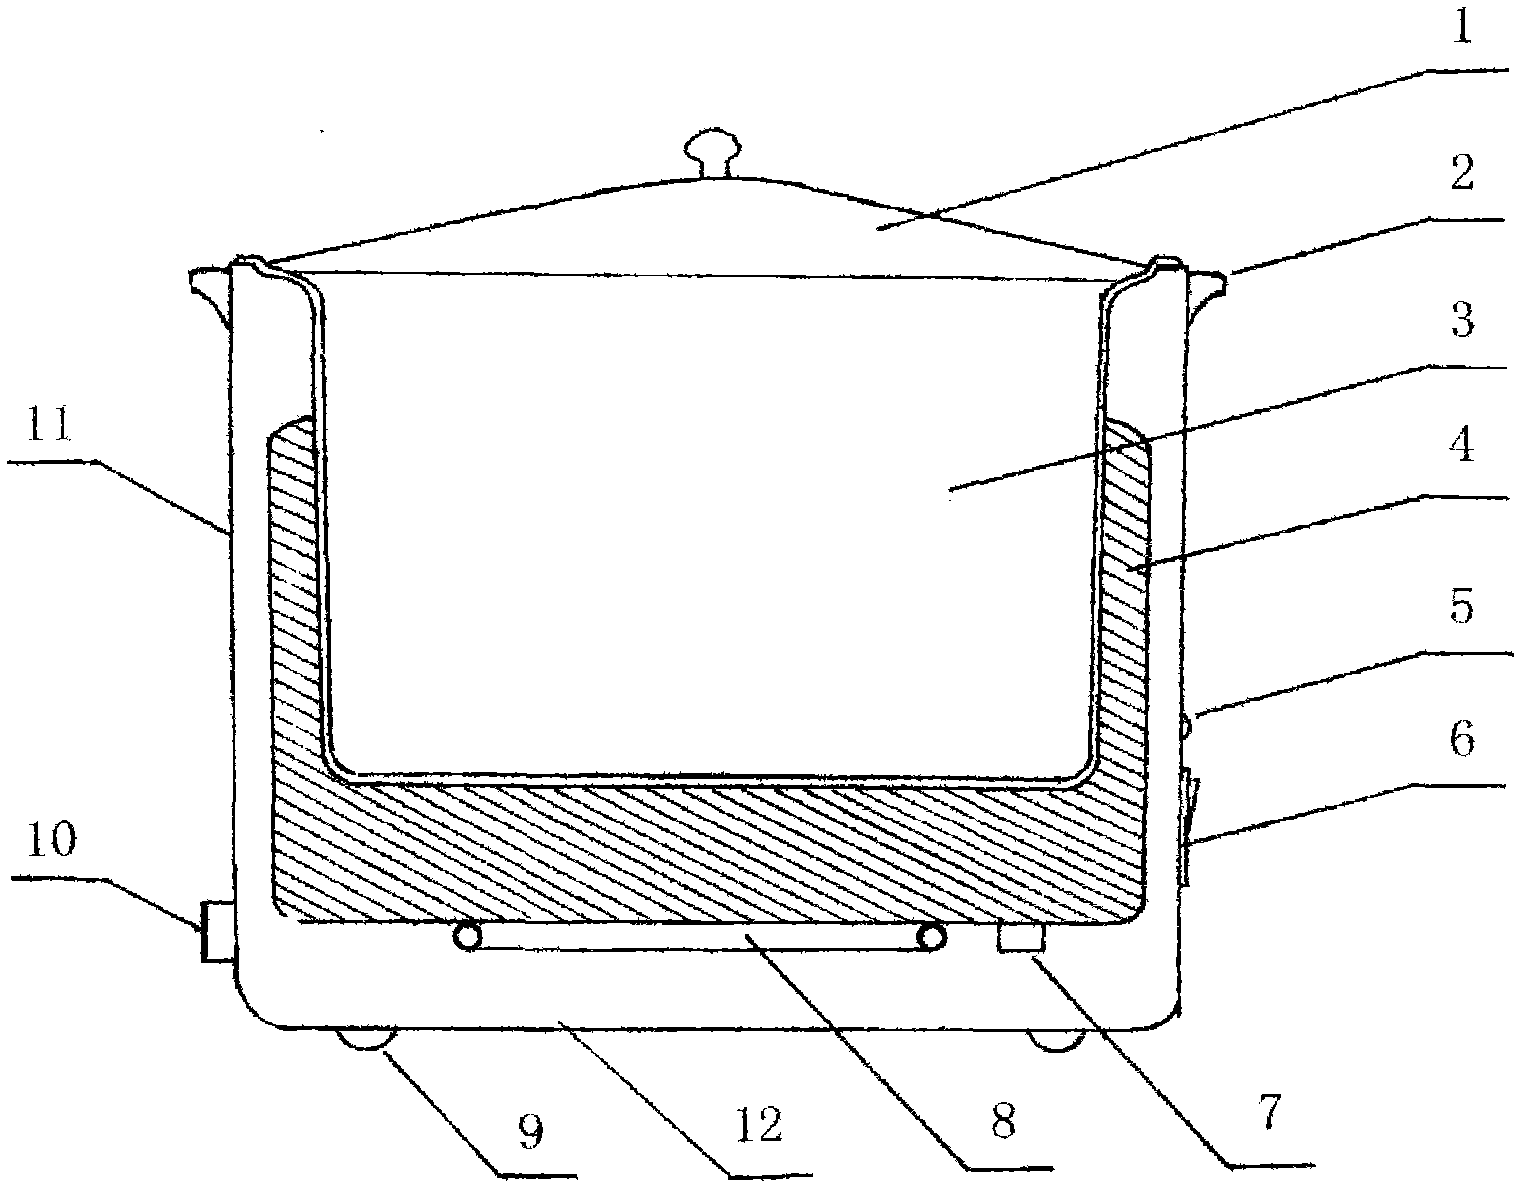 Superconductive energy-saving and heat-accumulating domestic slow cooker and manufacturing method thereof